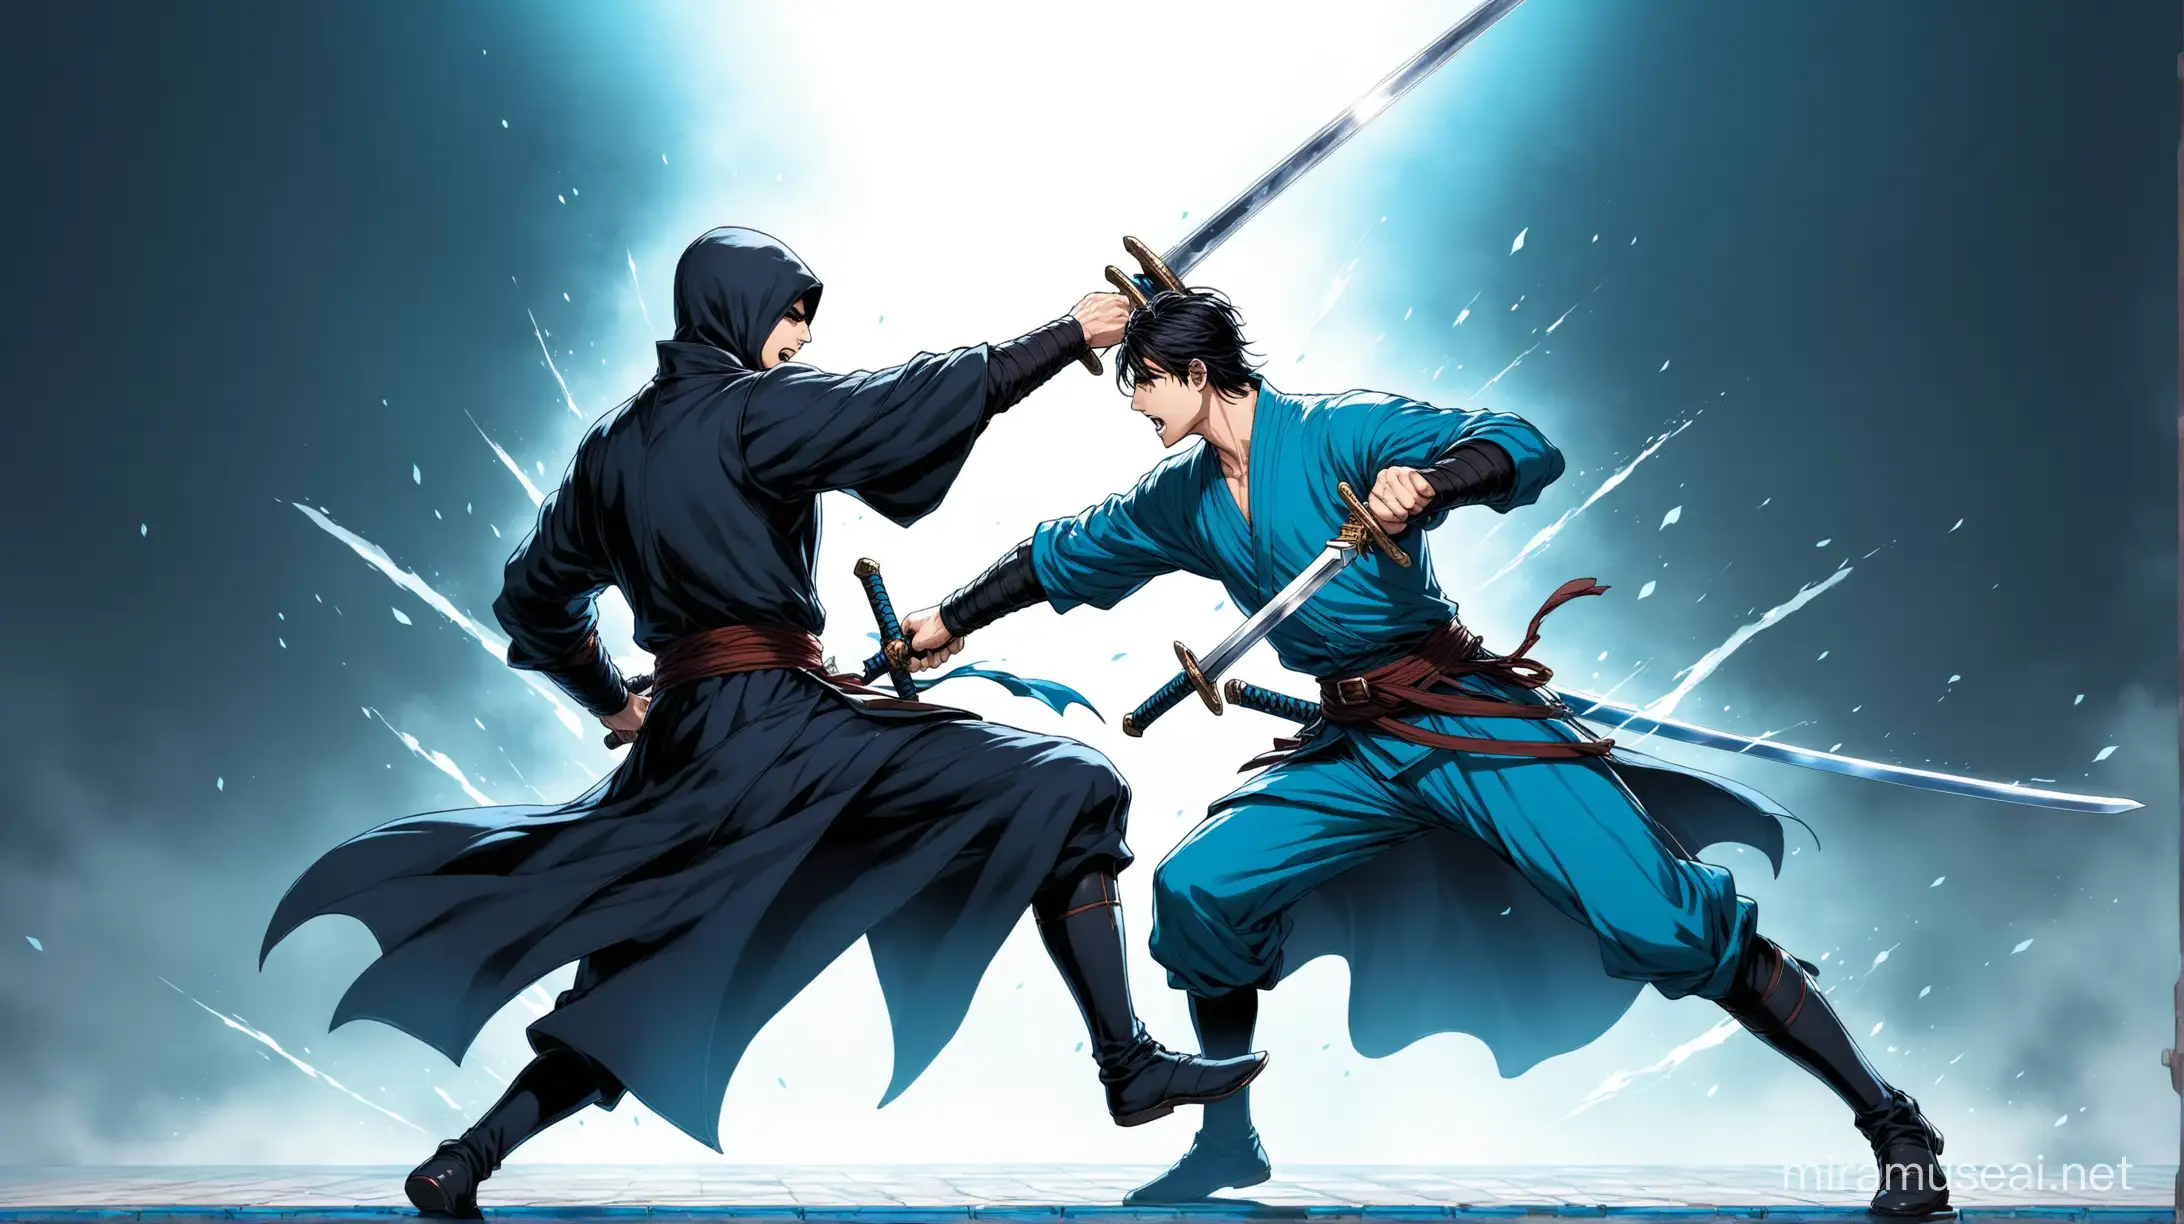 The swordsman in blue jumped with his sword clashing with his opponent in dark clothes